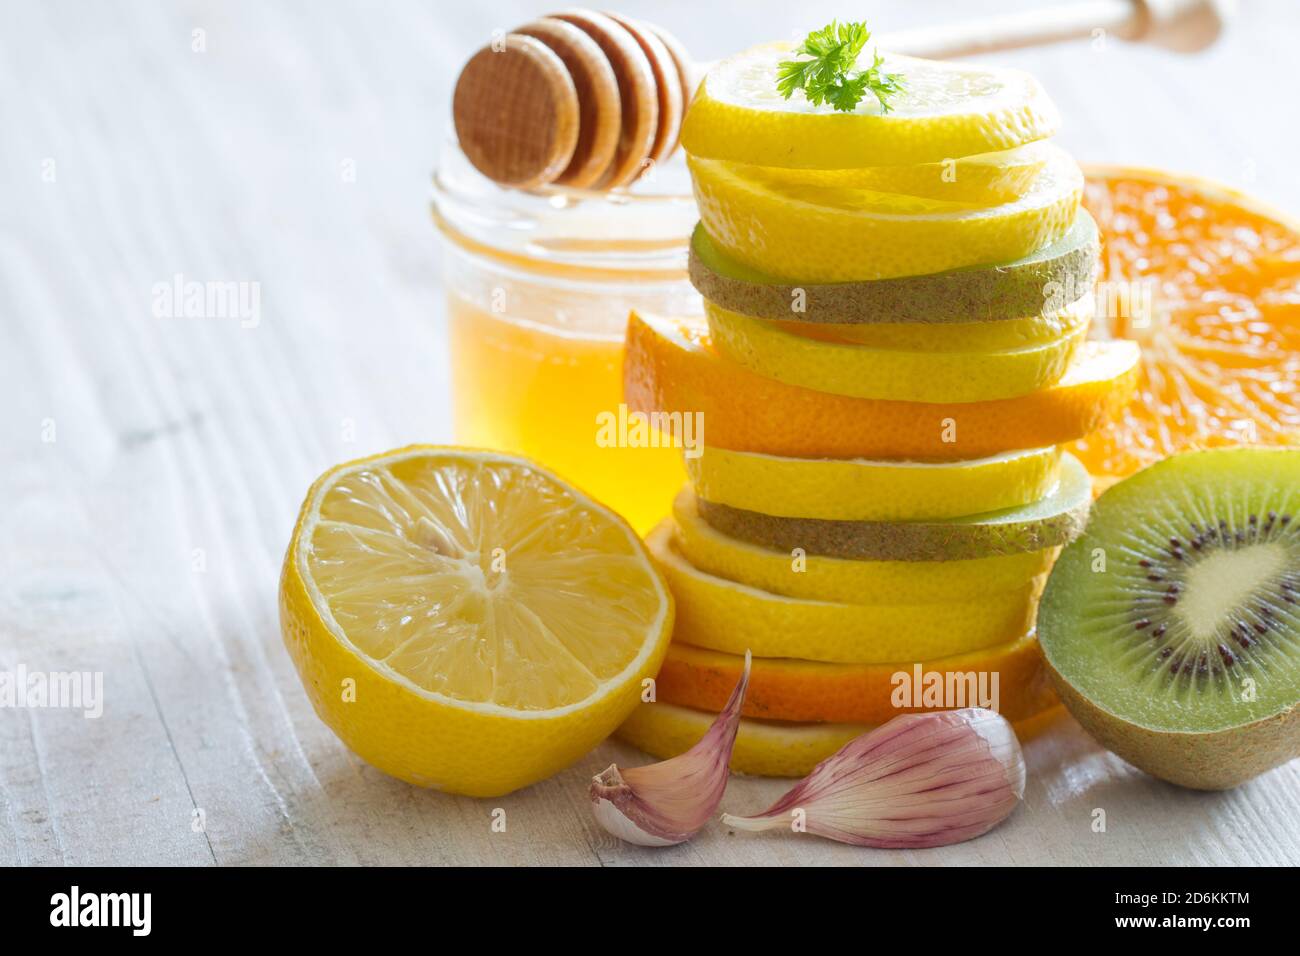 Citrus, honey and garlic as home remedies for colds and flu. Immunity concept Stock Photo